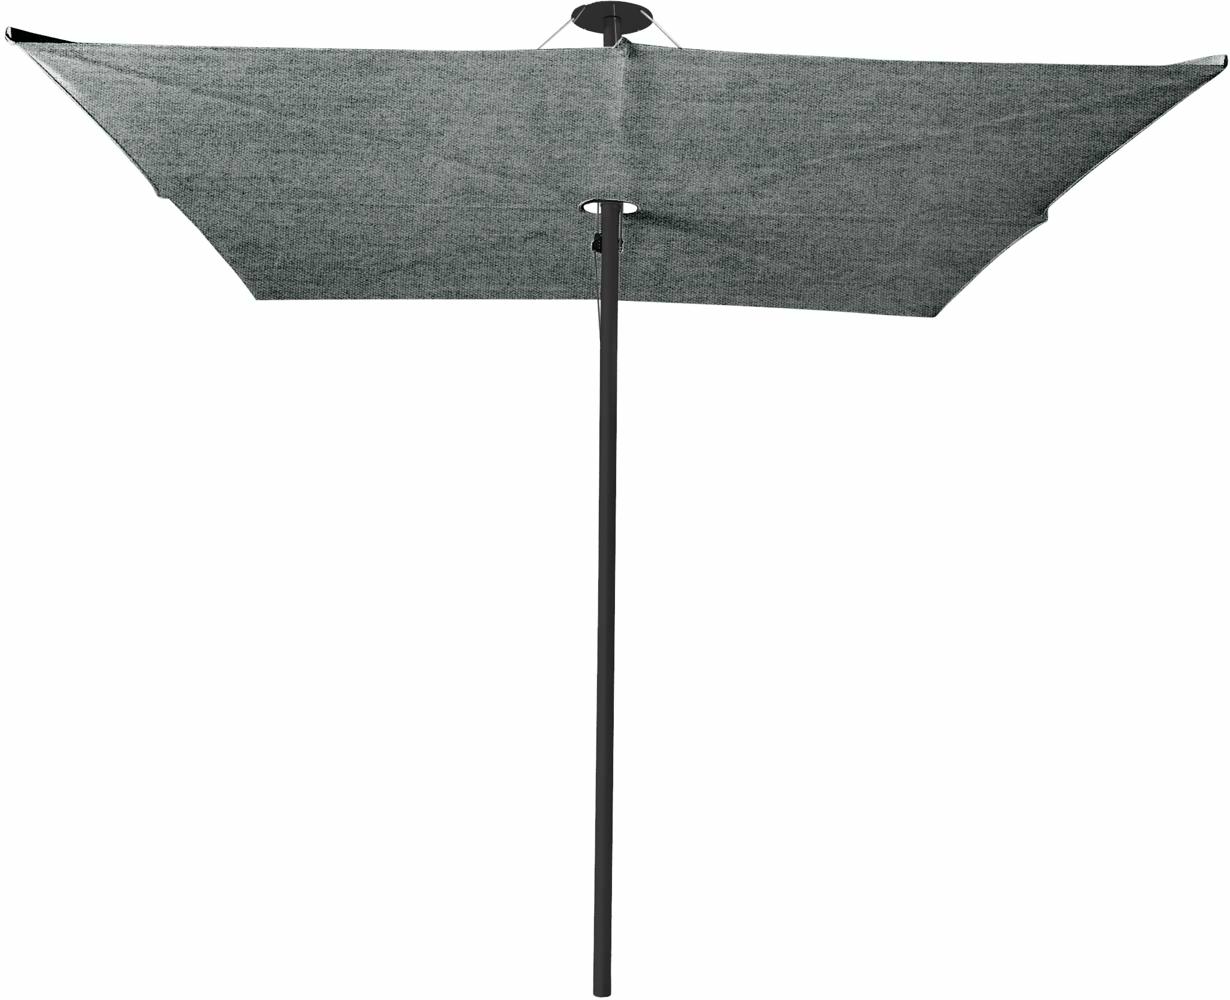 Infina center post umbrella, 3 m square, with frame in Dusk and Solidum Flanelle canopy. 